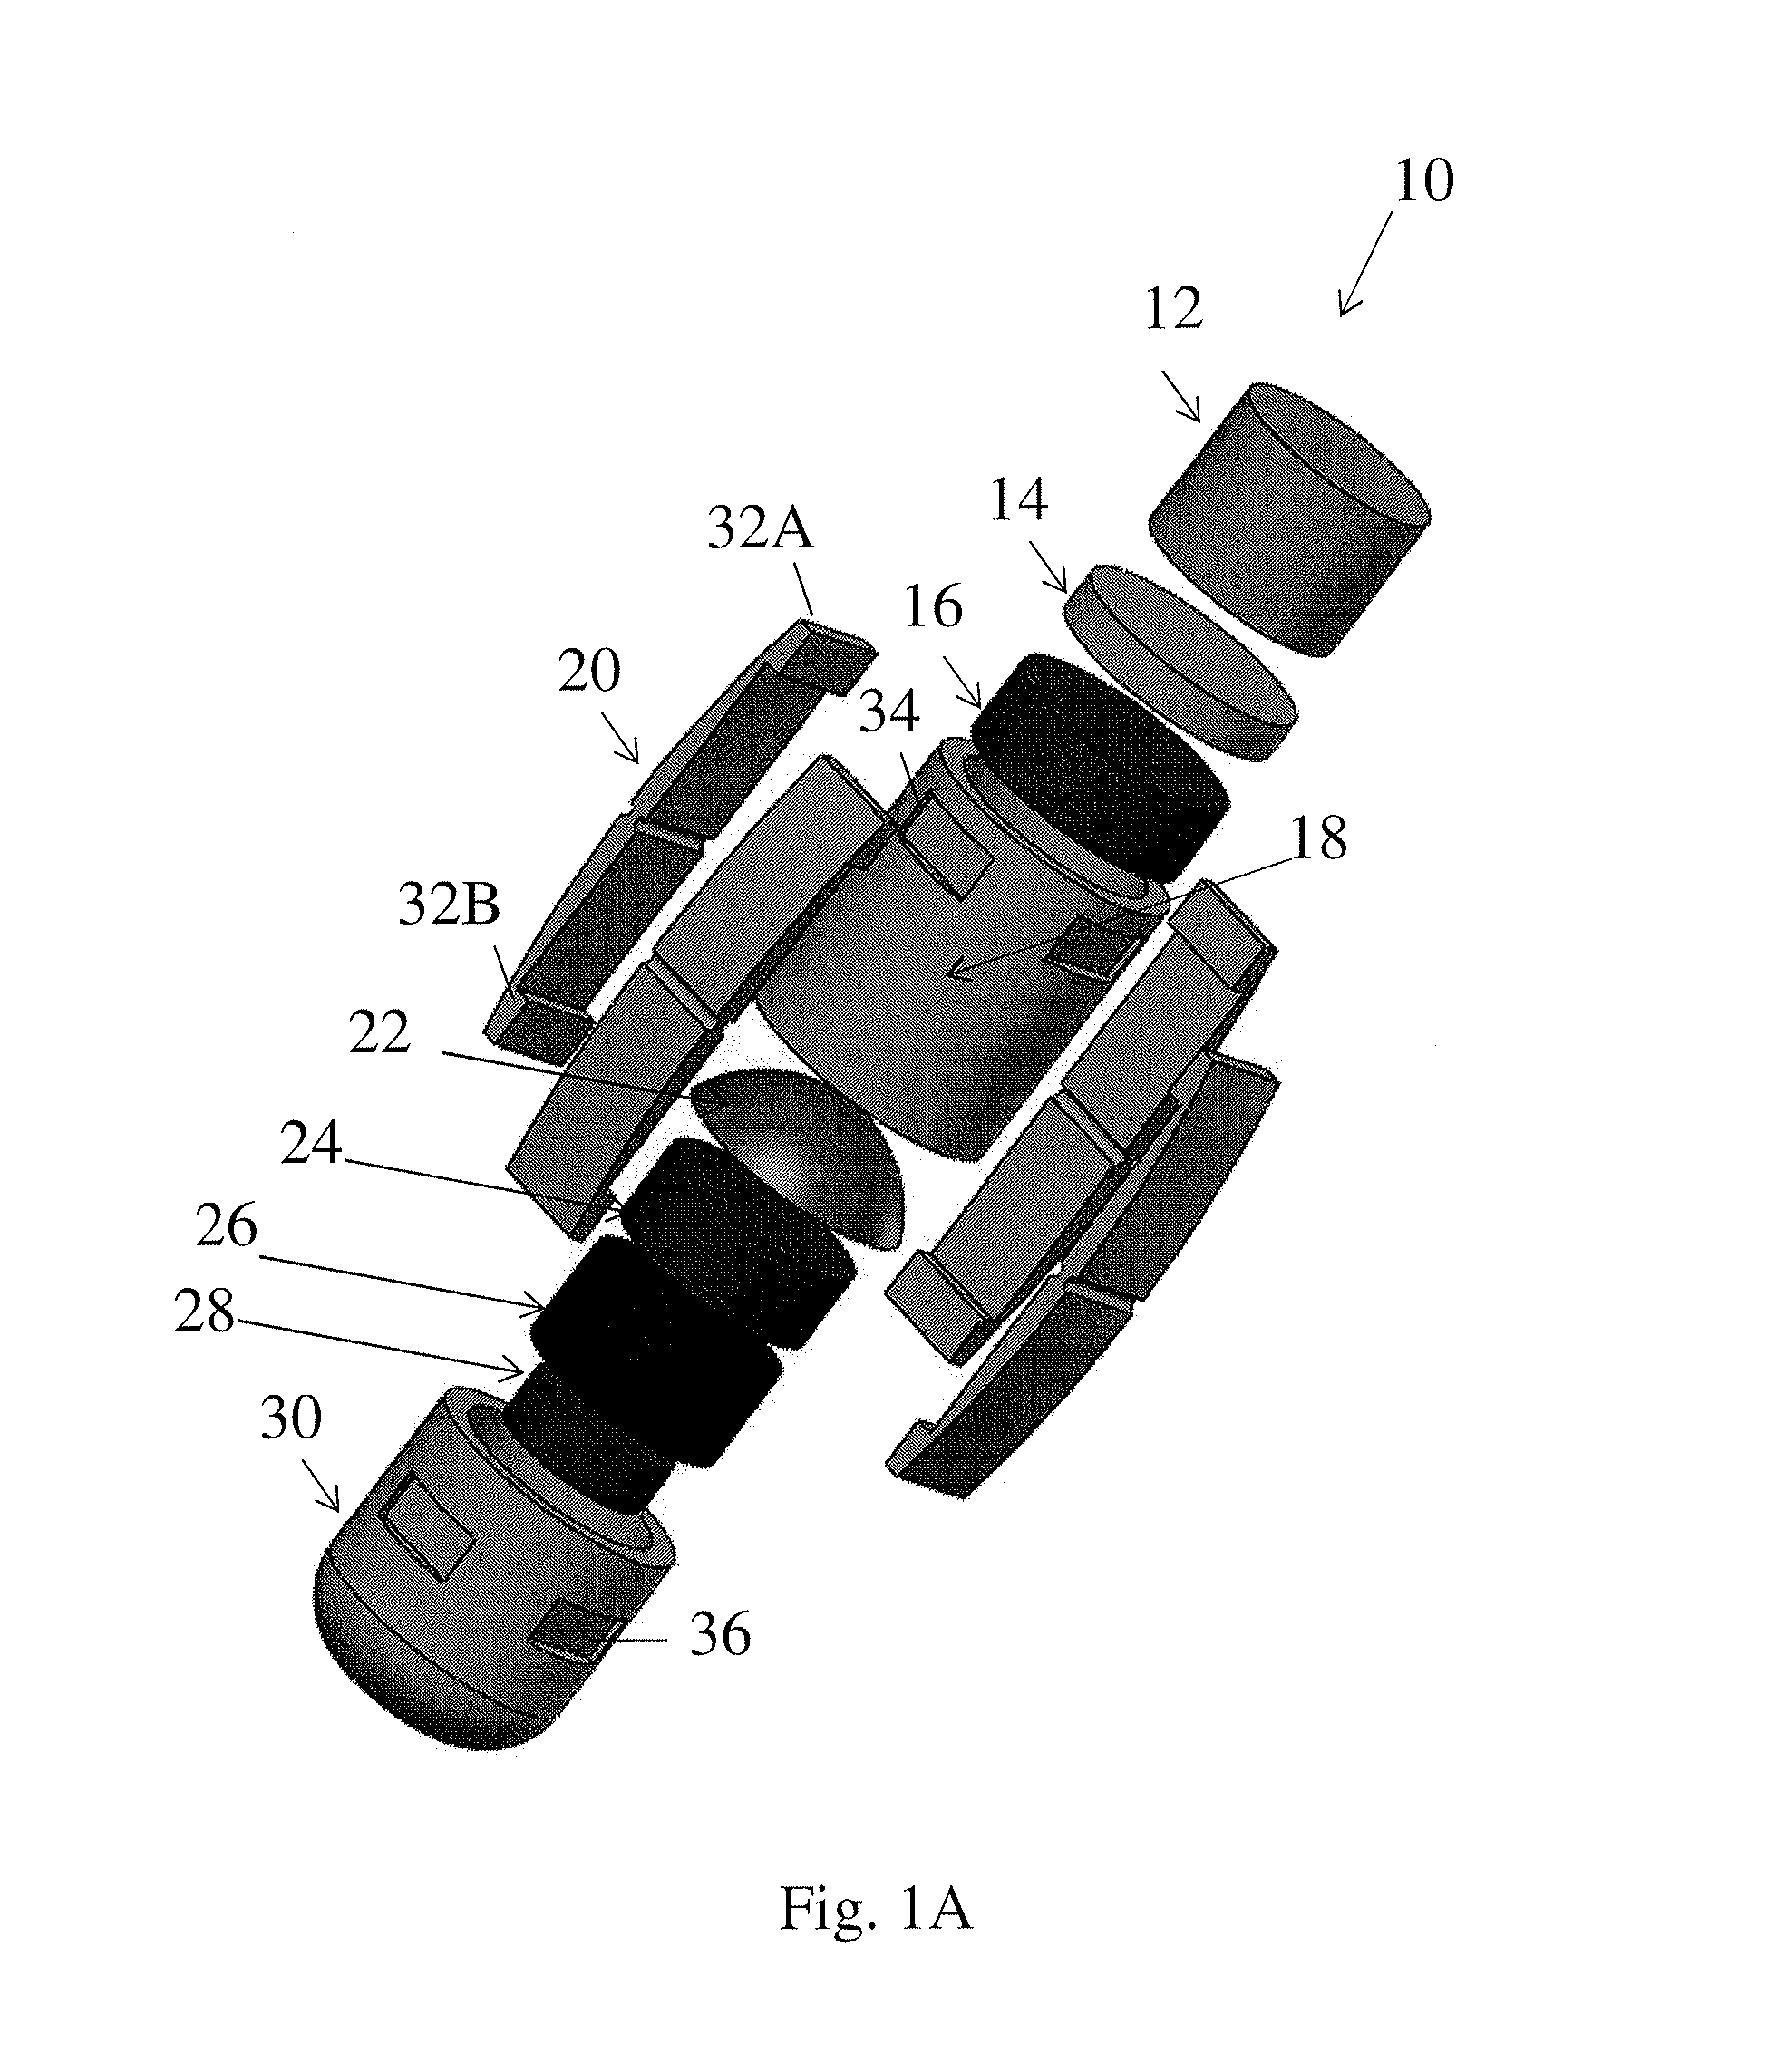 System and method to magnetically actuate a capsule endoscopic robot for diagnosis and treatment